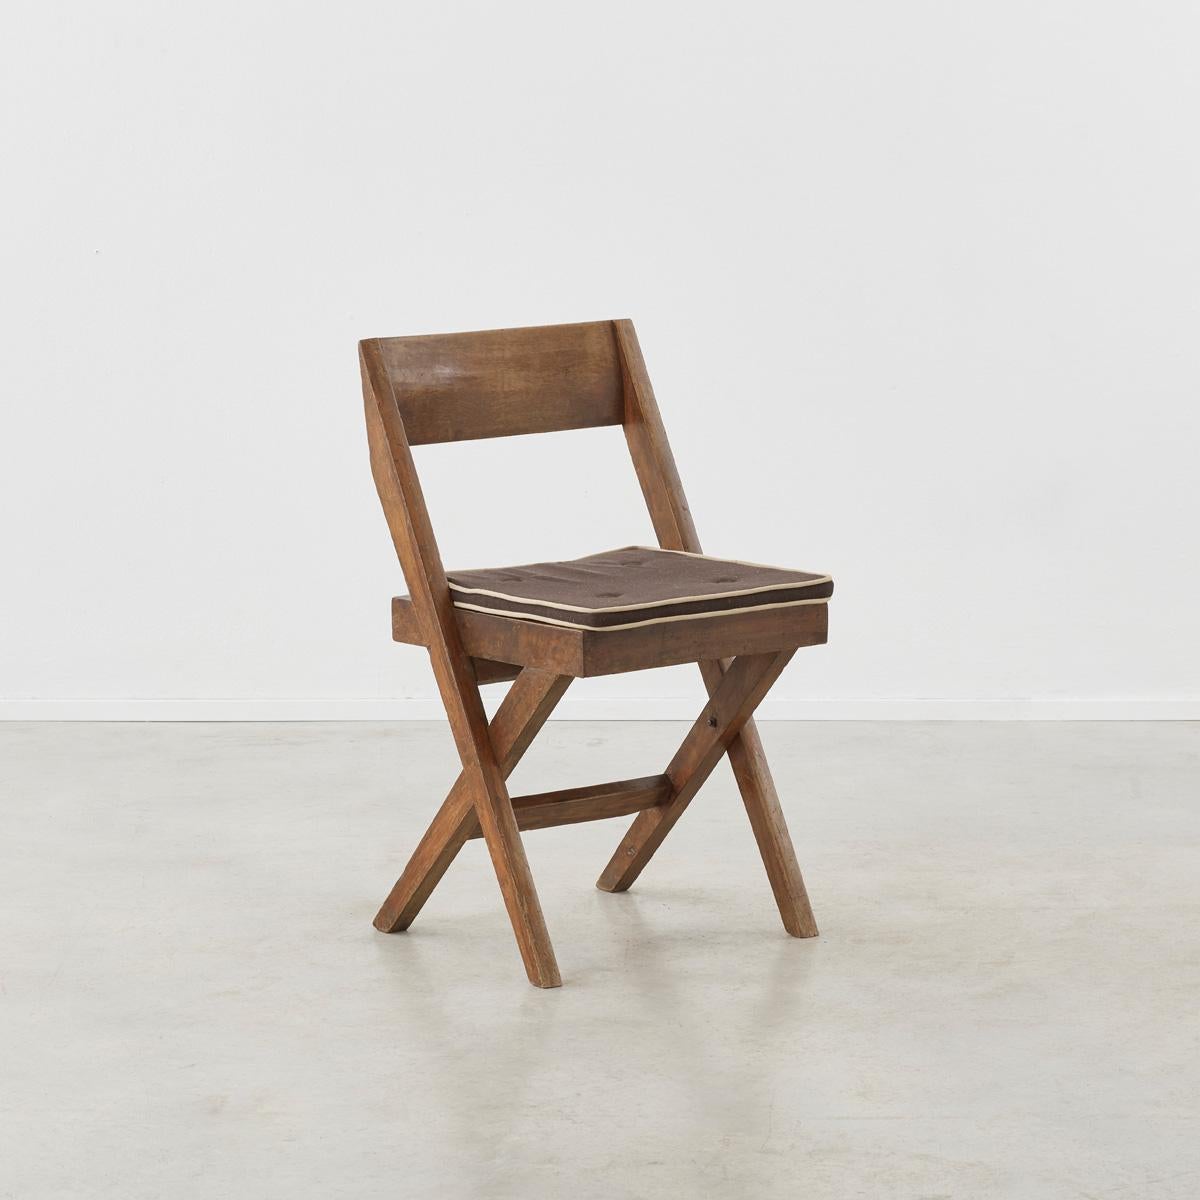 Pierre Jeanneret (1896-1967) is recognised as a pivotal figure in modernism. His collaborations with his cousin Le Corbusier are especially significant, particularly their codification of modernist architectural principles in Five Points Towards a